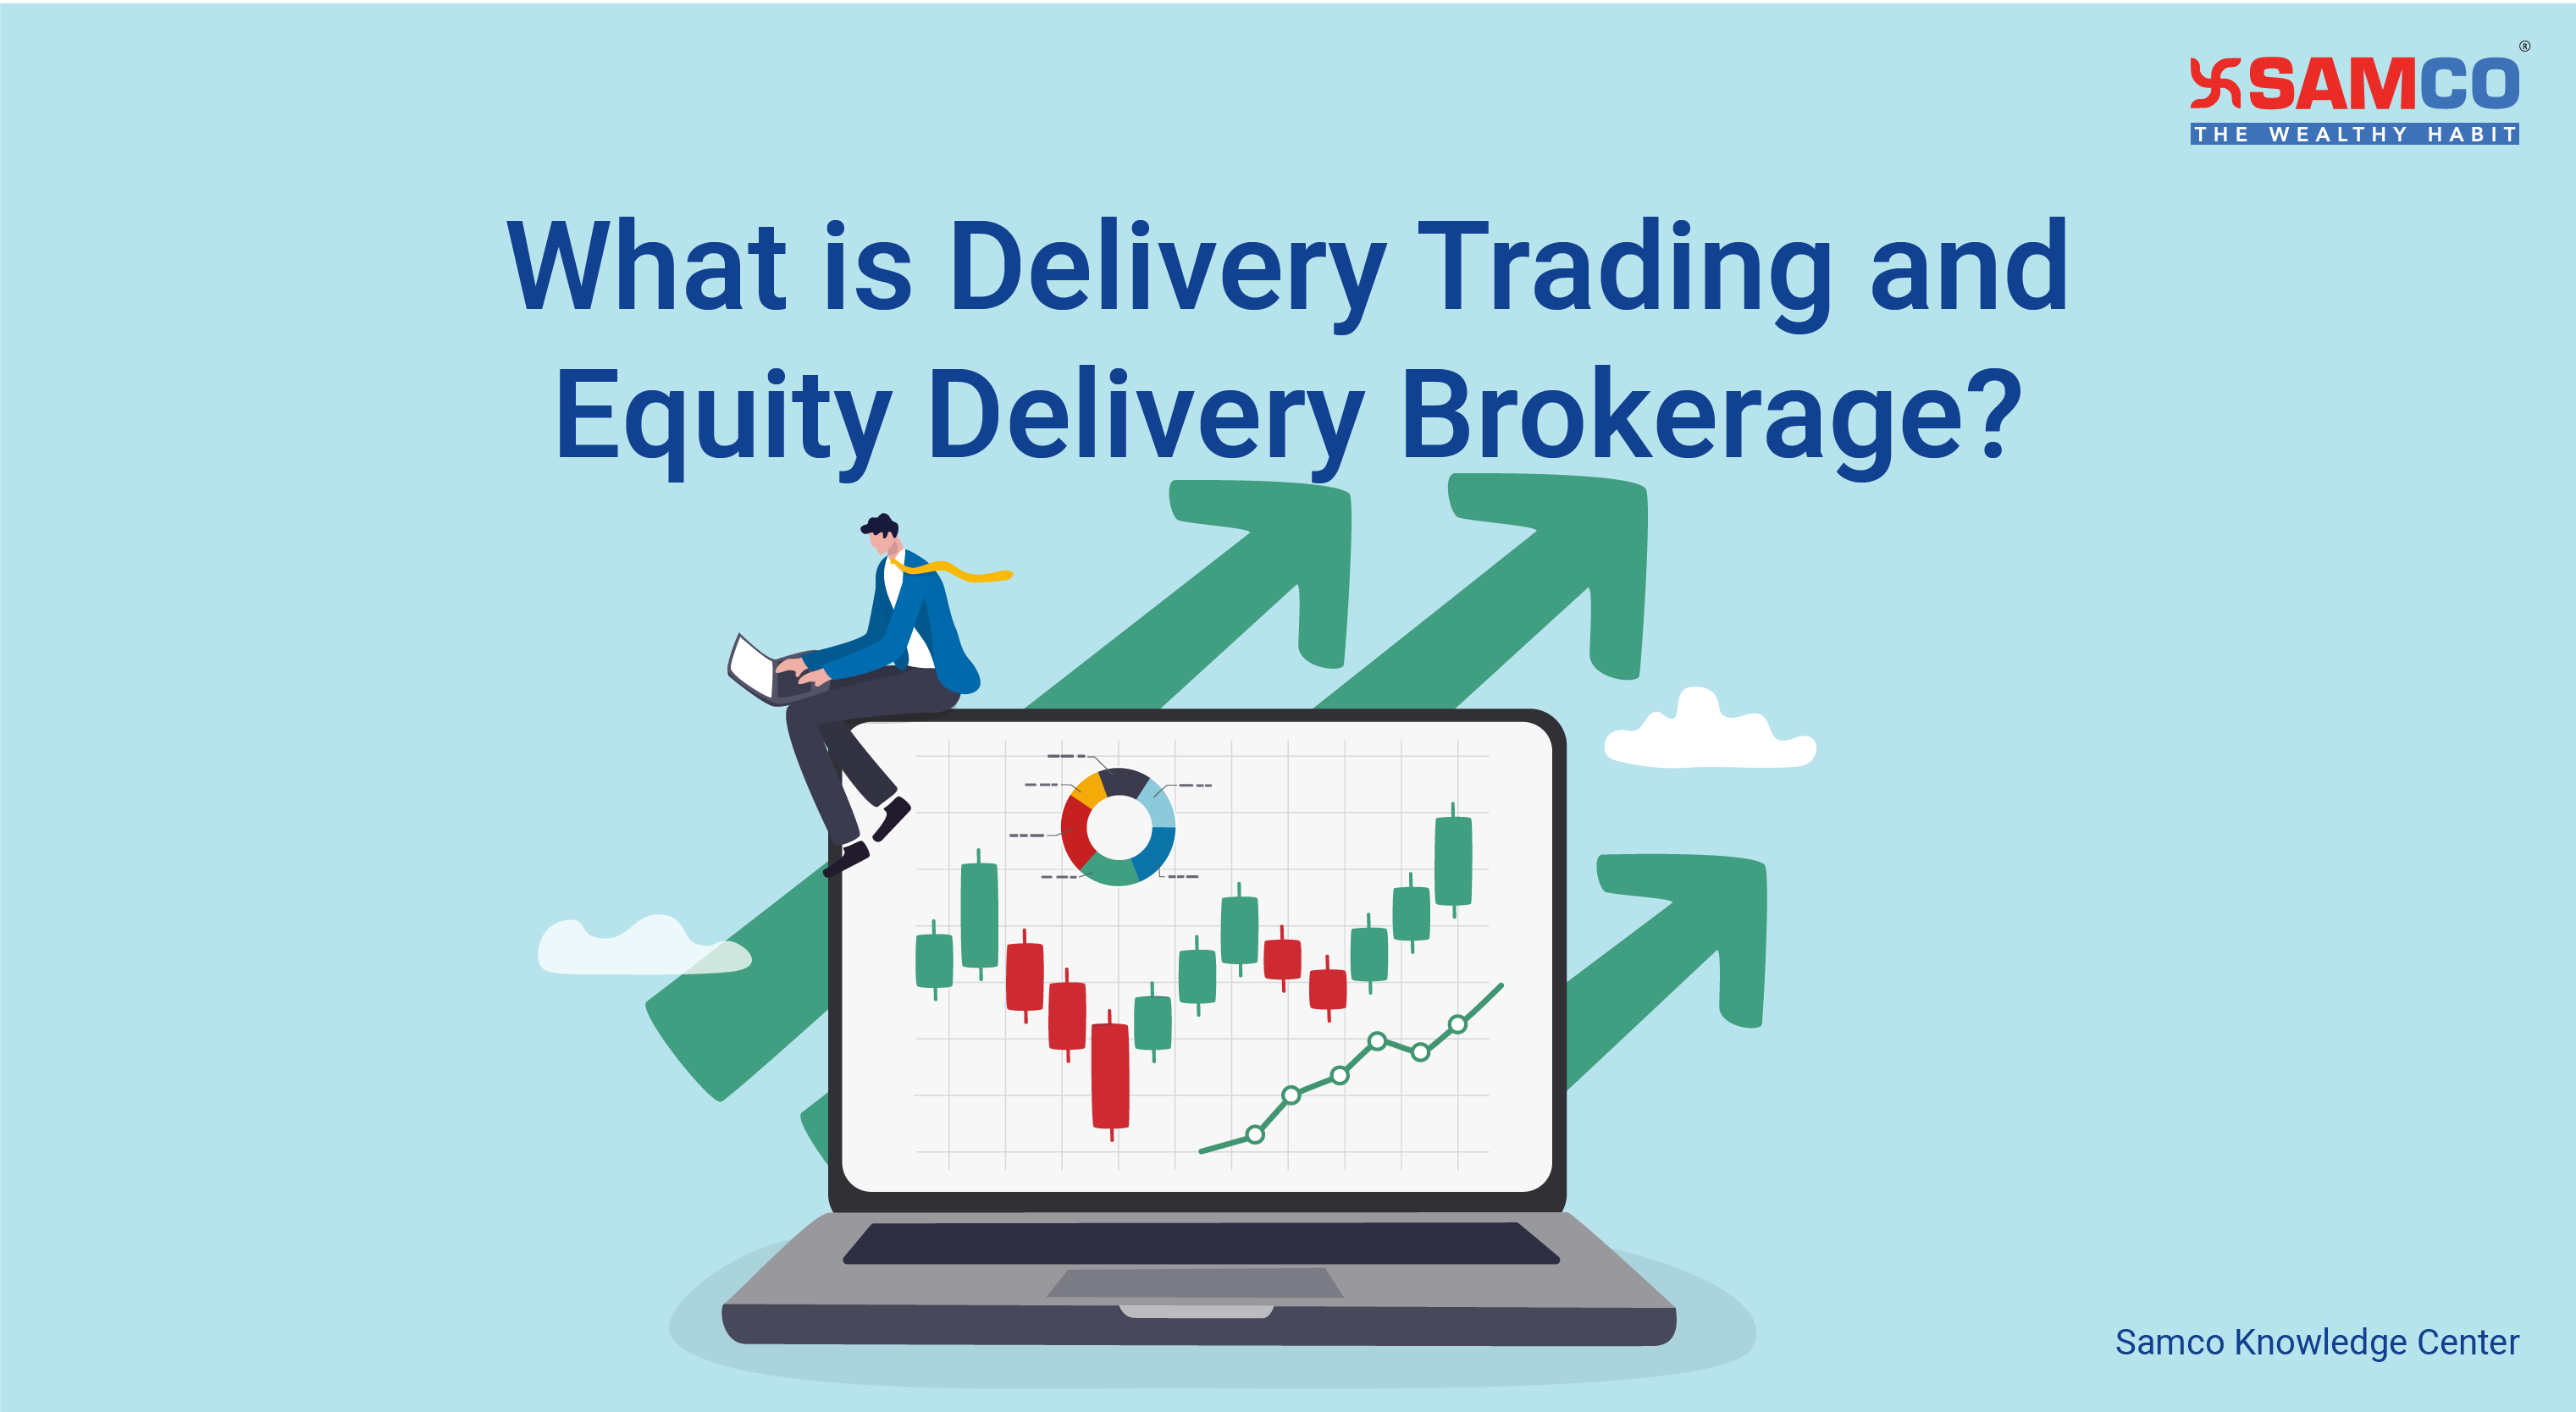 What is Delivery Trading and Equity Delivery Brokerage?